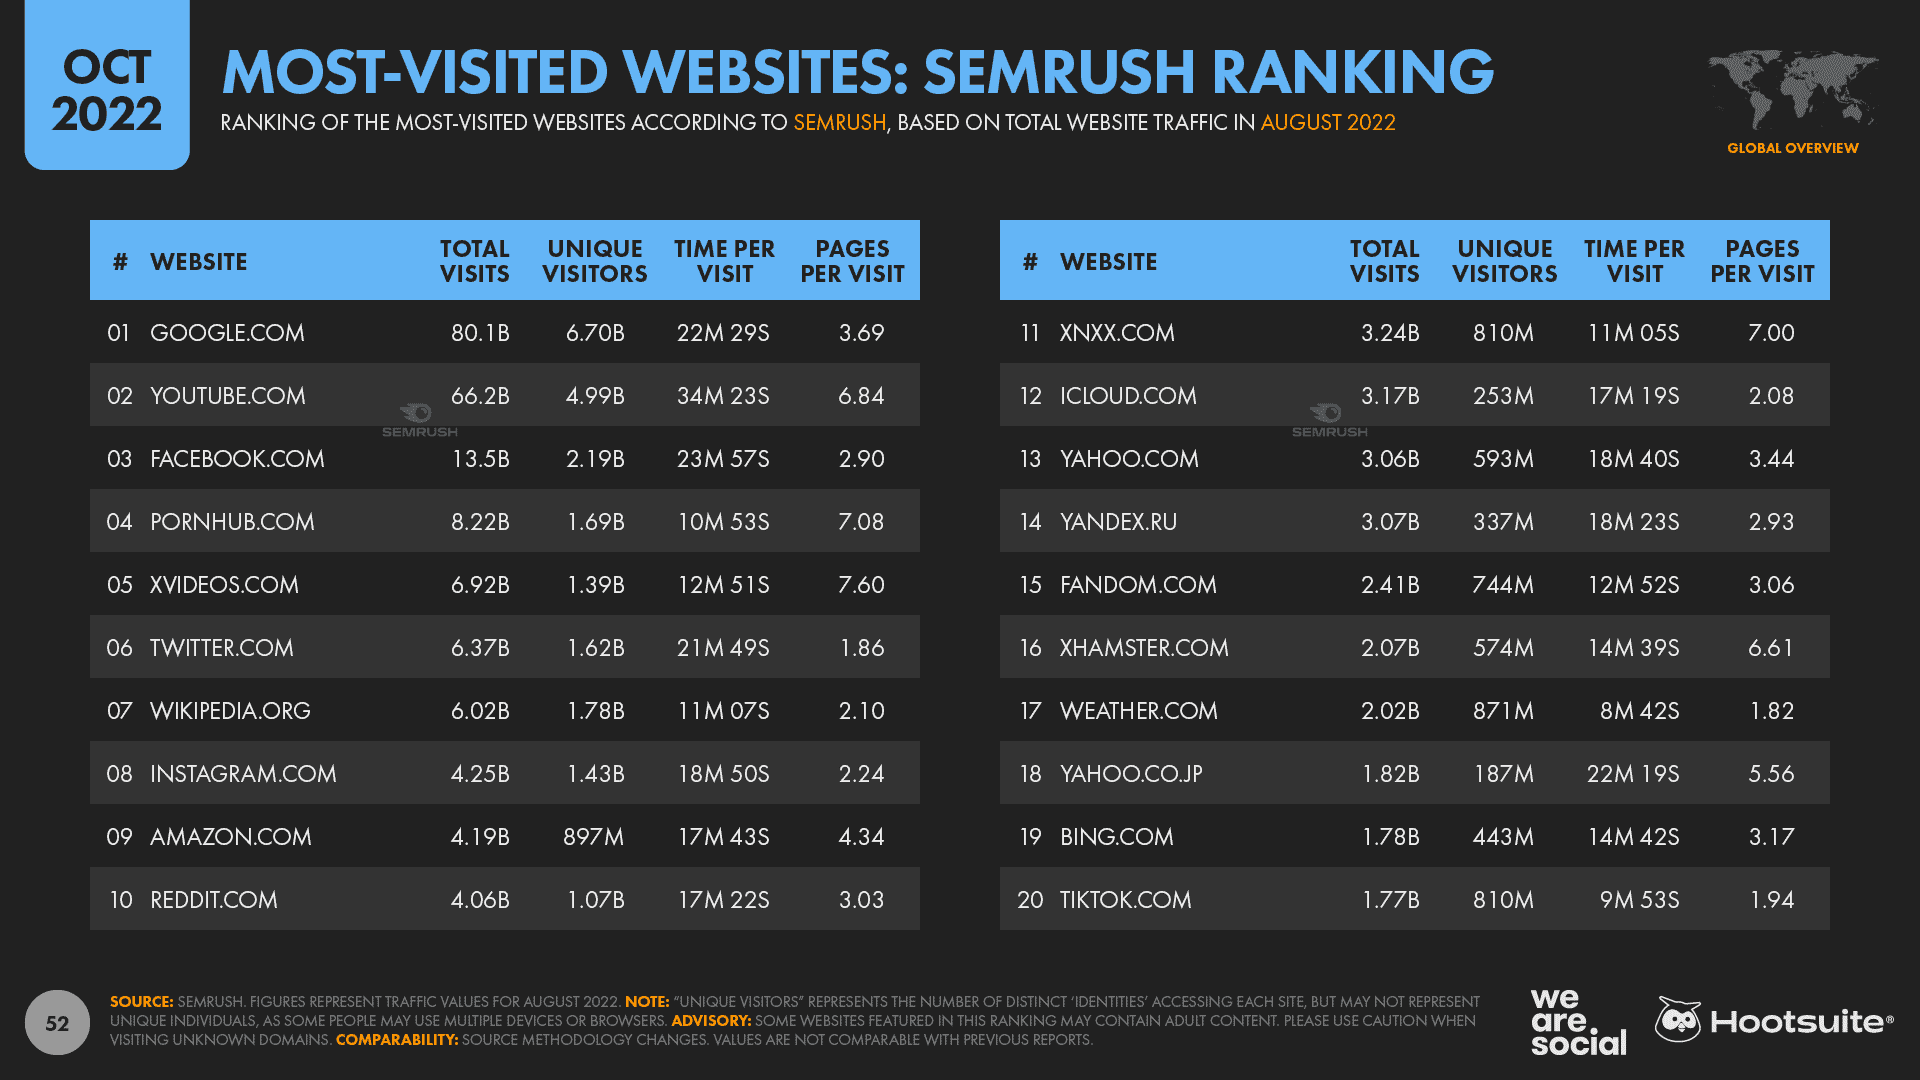 Chart showing most-visited website ranking